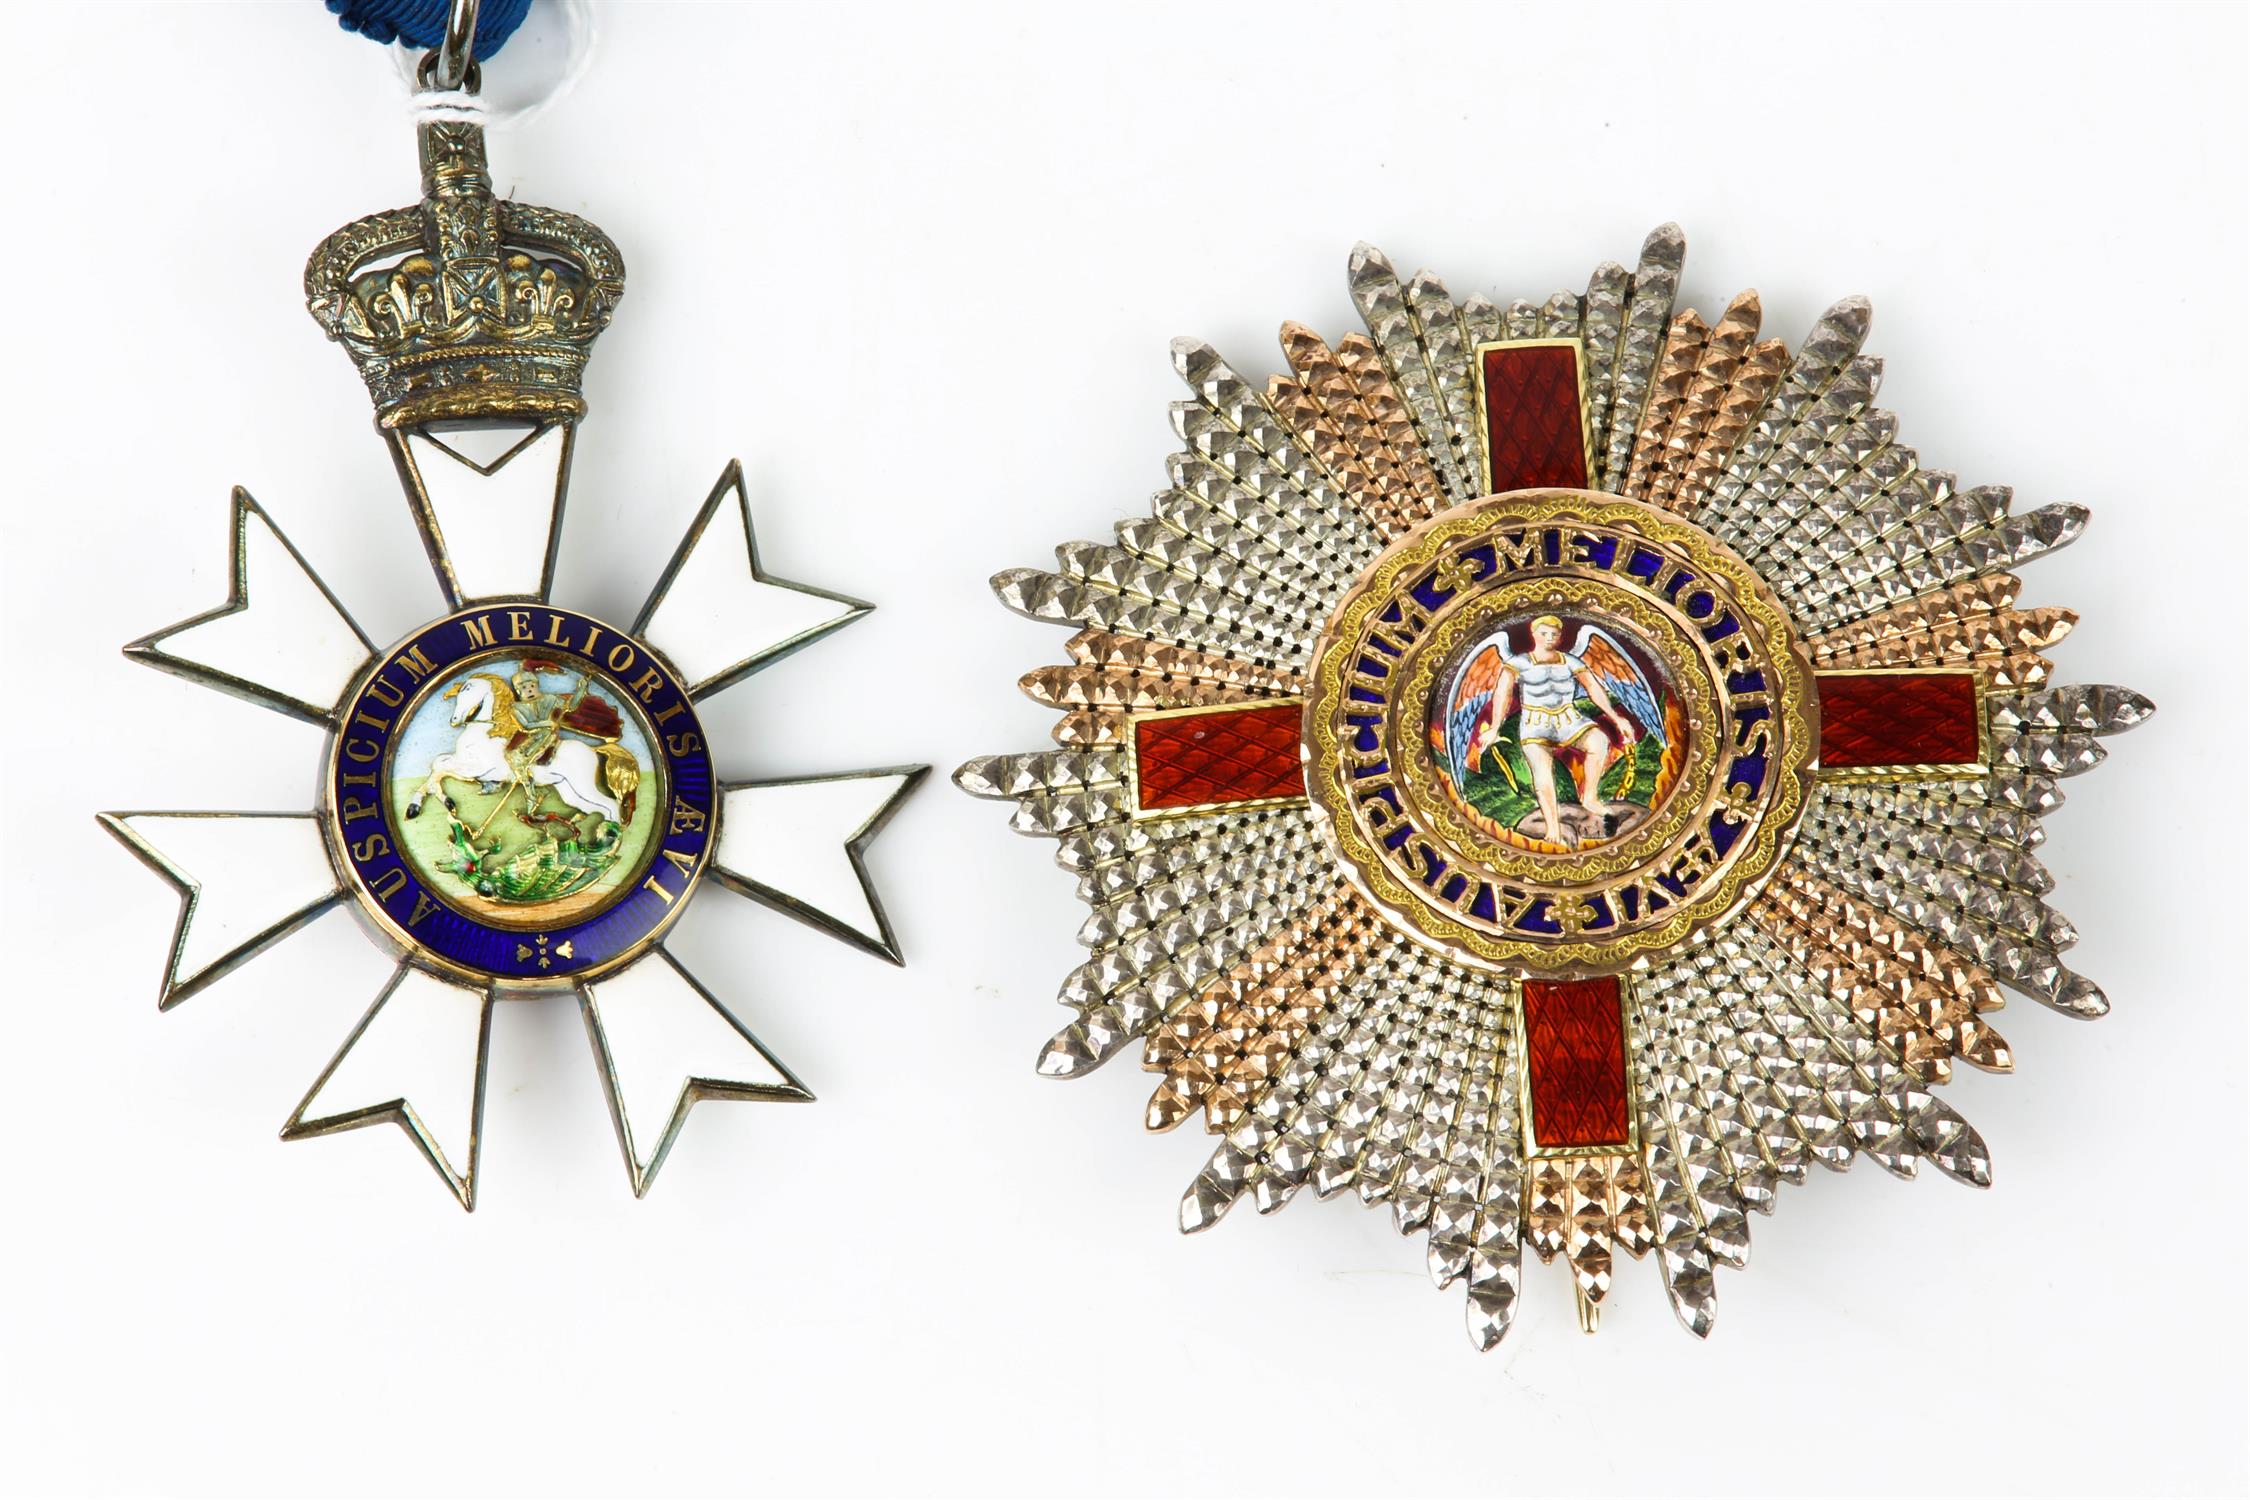 The Most Distinguished Order of St. Michael and St. George, G.C.M.G., Knight Grand Cross star and